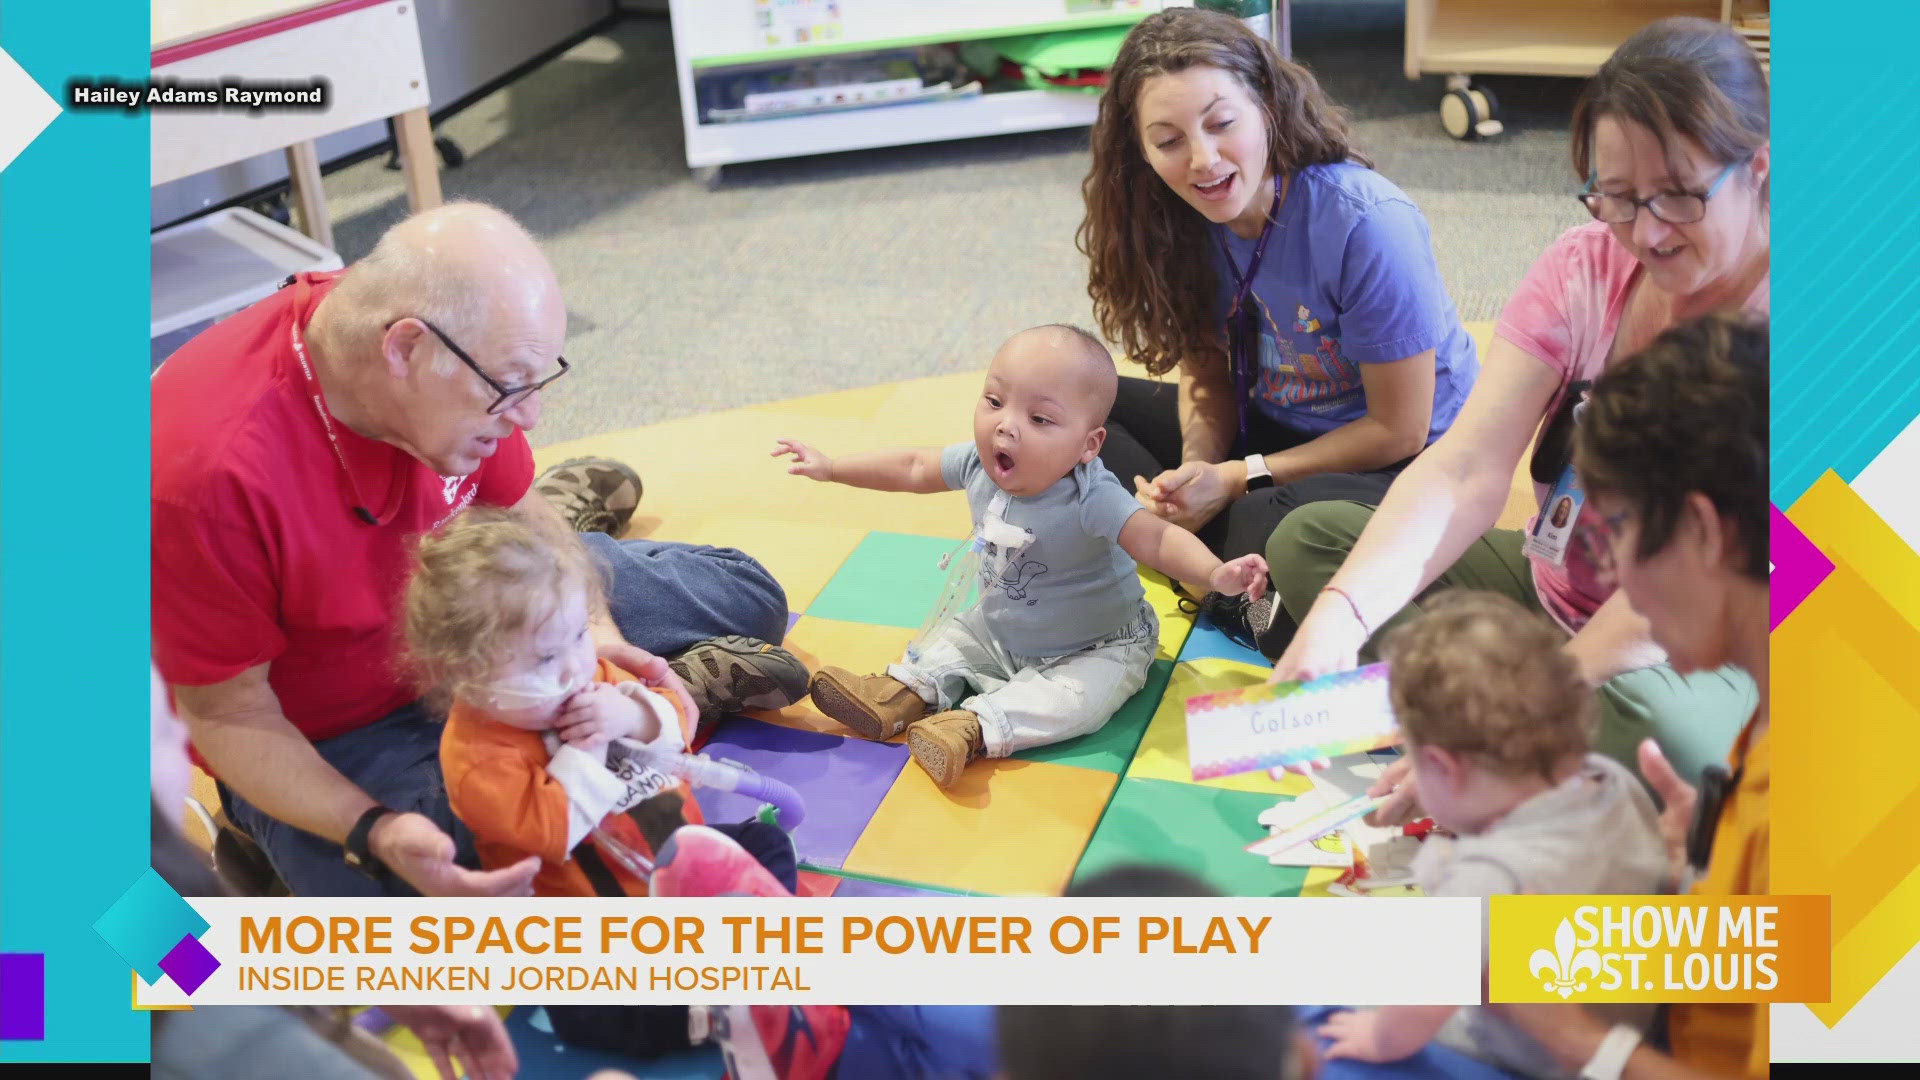 Ranken Jordan shares their new $1.4 million renovation project to create more space for young patients to play.